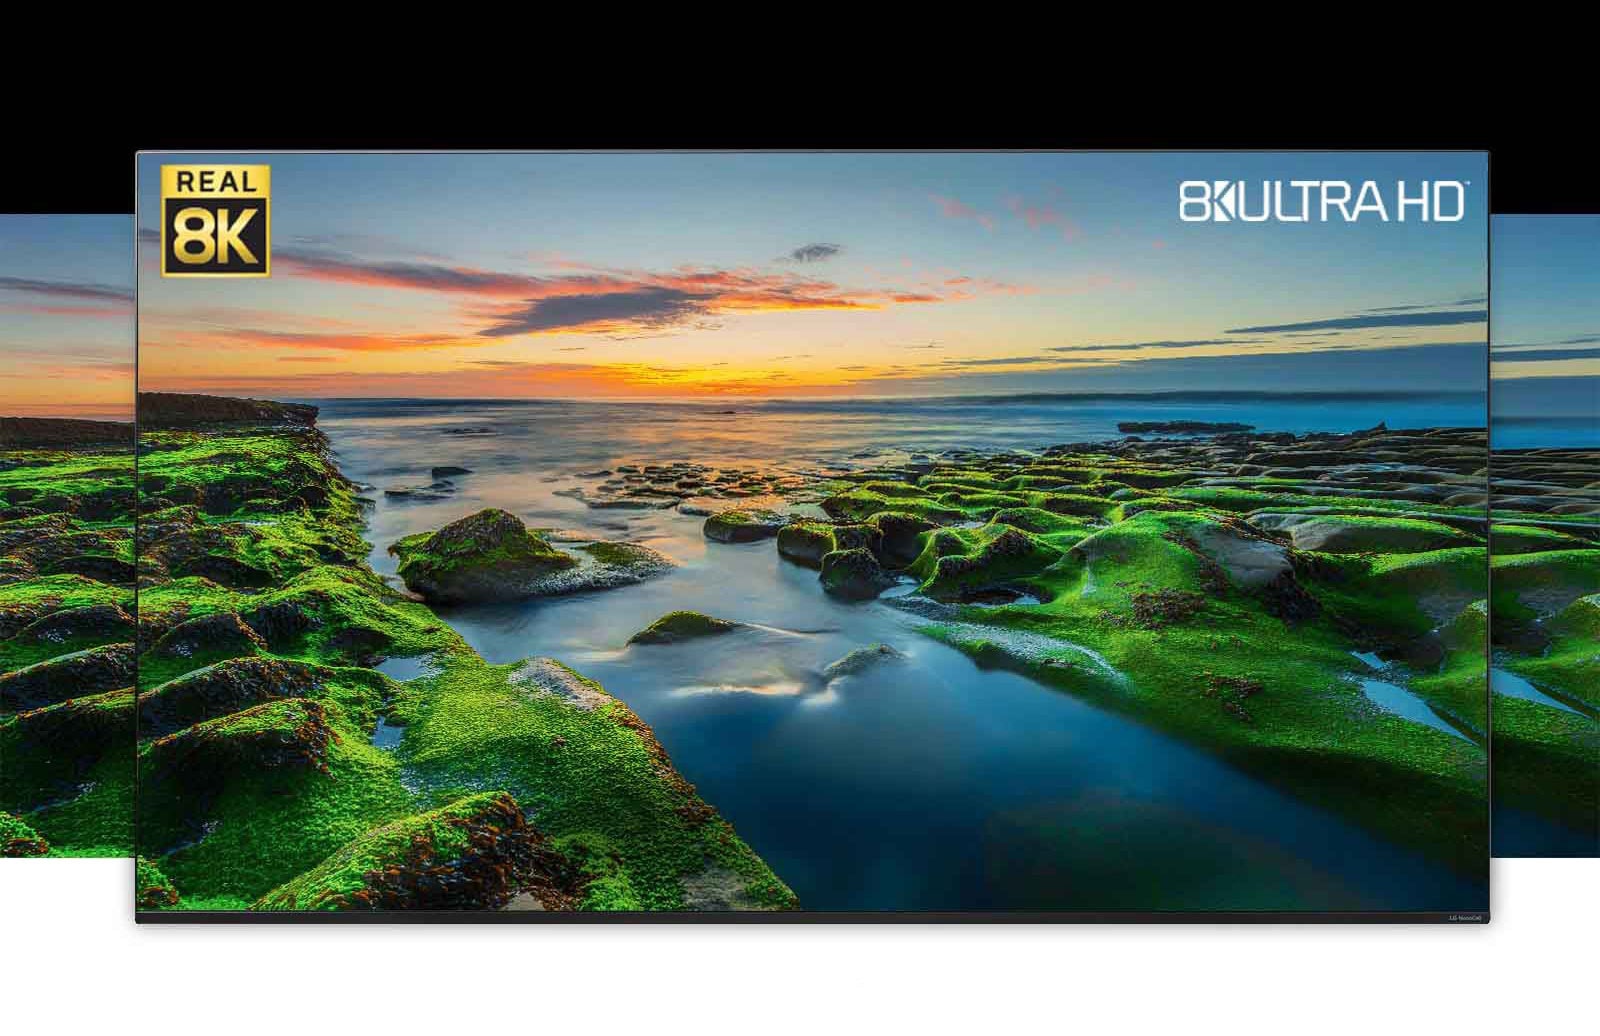 TV screen showing the wide view of nature with Real 8K and CTA logos